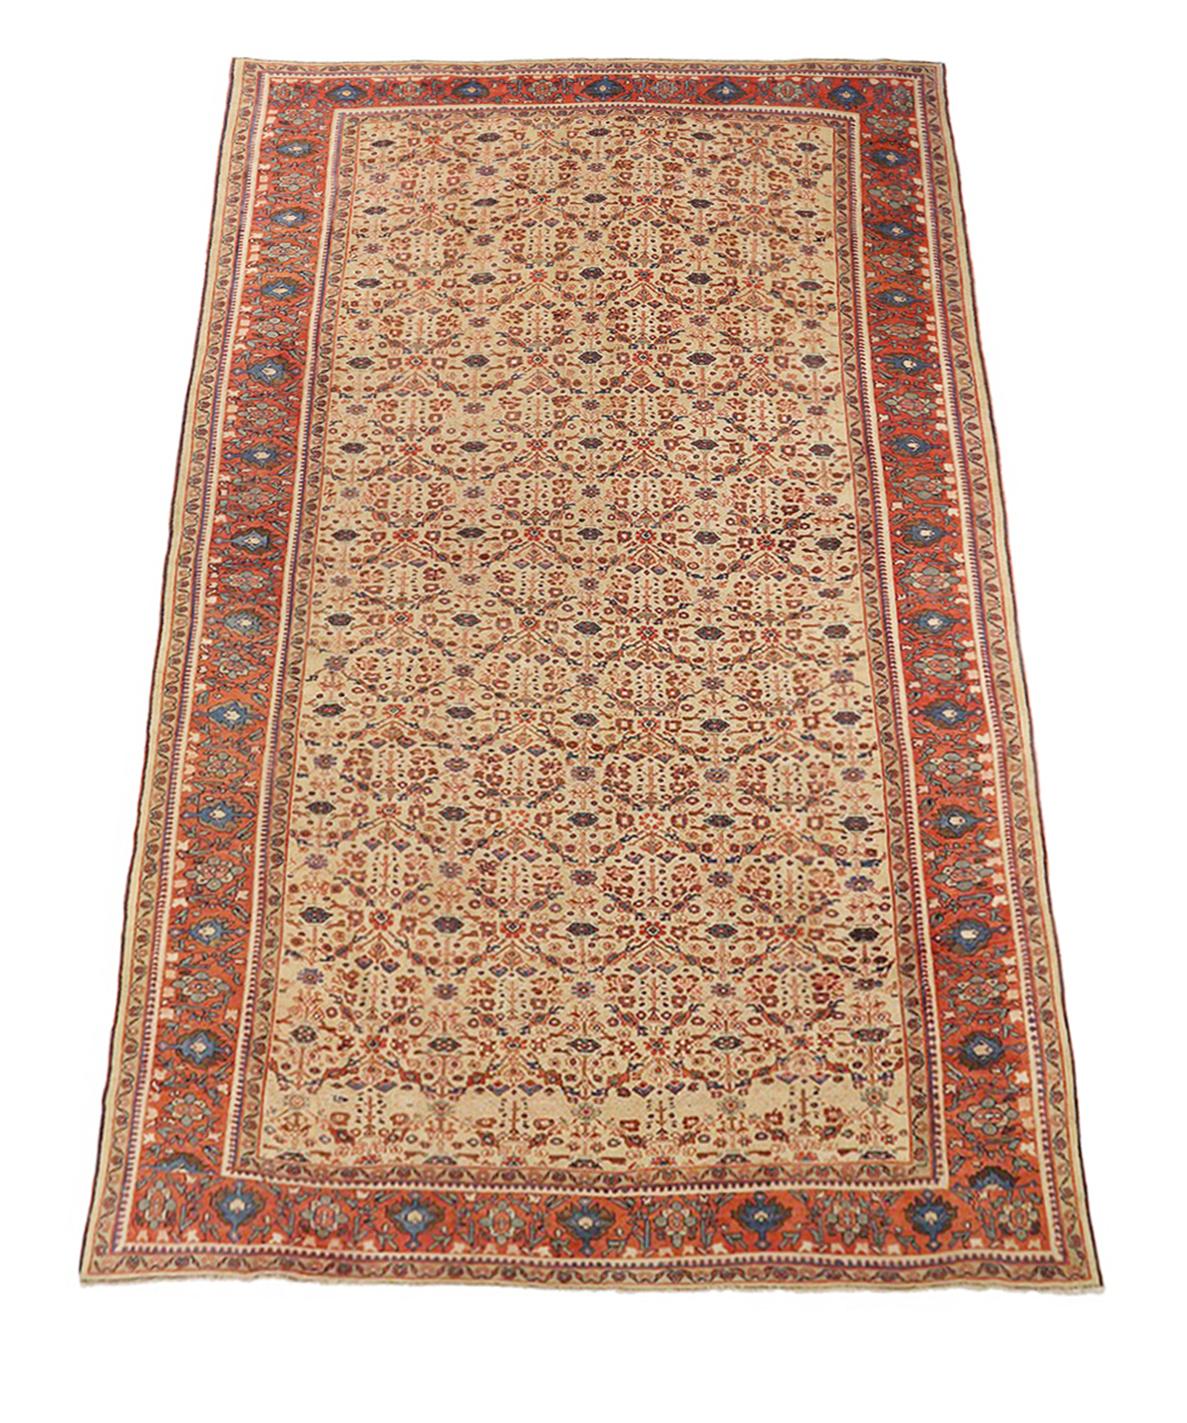 Antique handmade Persian area rug from high-quality sheep’s wool and colored with eco-friendly vegetable dyes that are proven safe for humans and pets alike. It’s a classic Sultanabad design showcasing a regal ivory field with prominent Herati